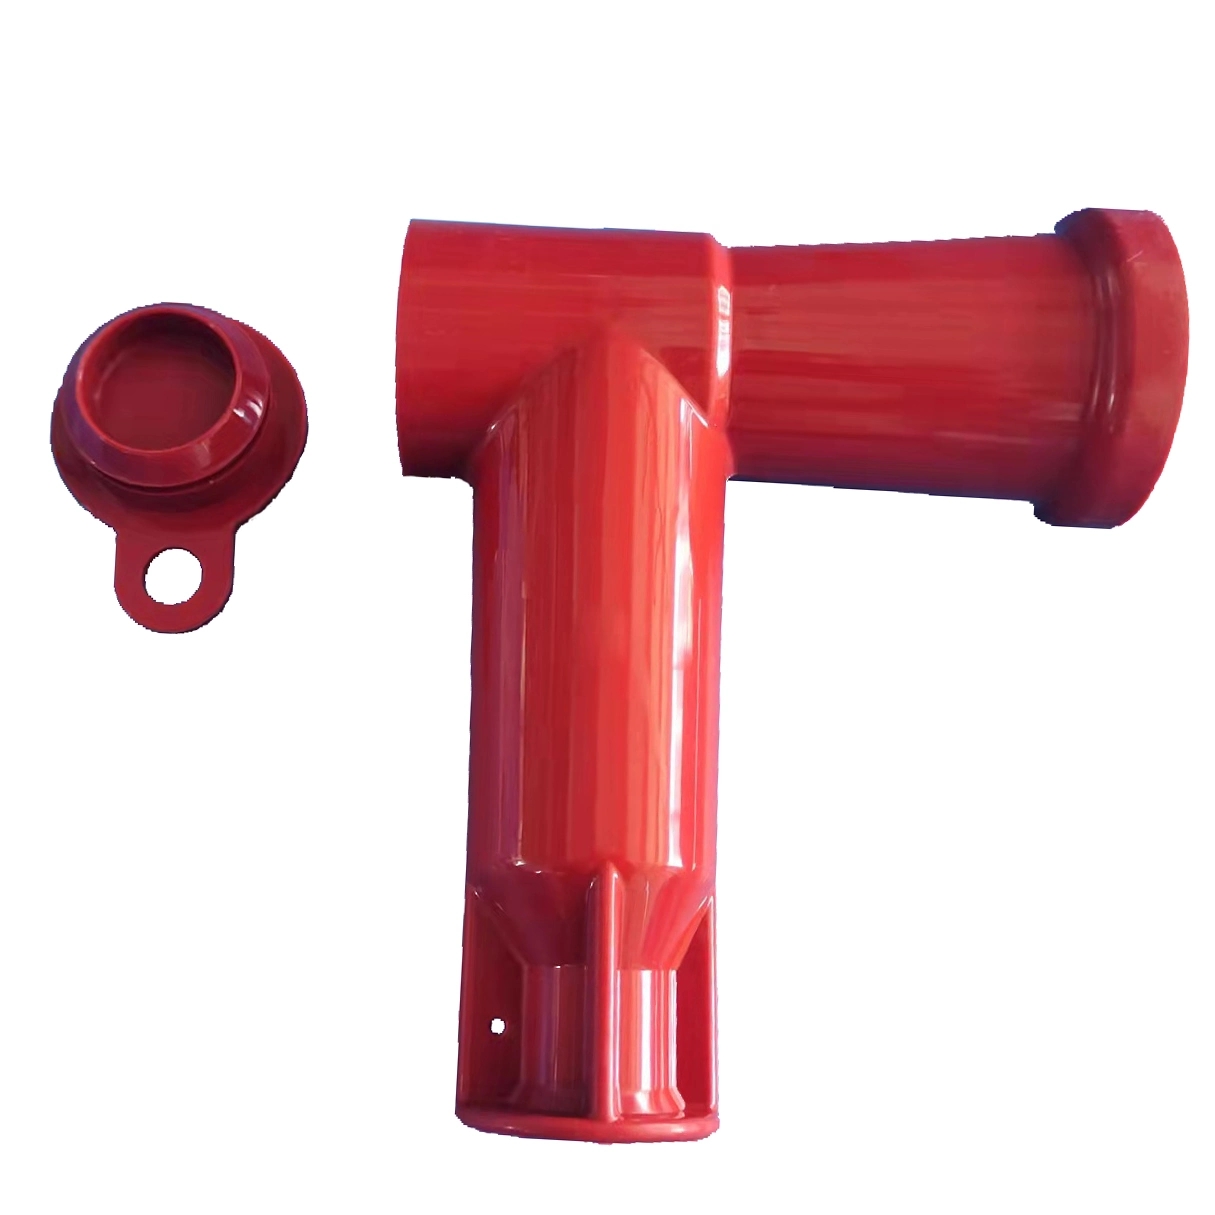 24kv Elbow Separable Connector/ T Cable Connector/Tee Body Connector/Separable Connector